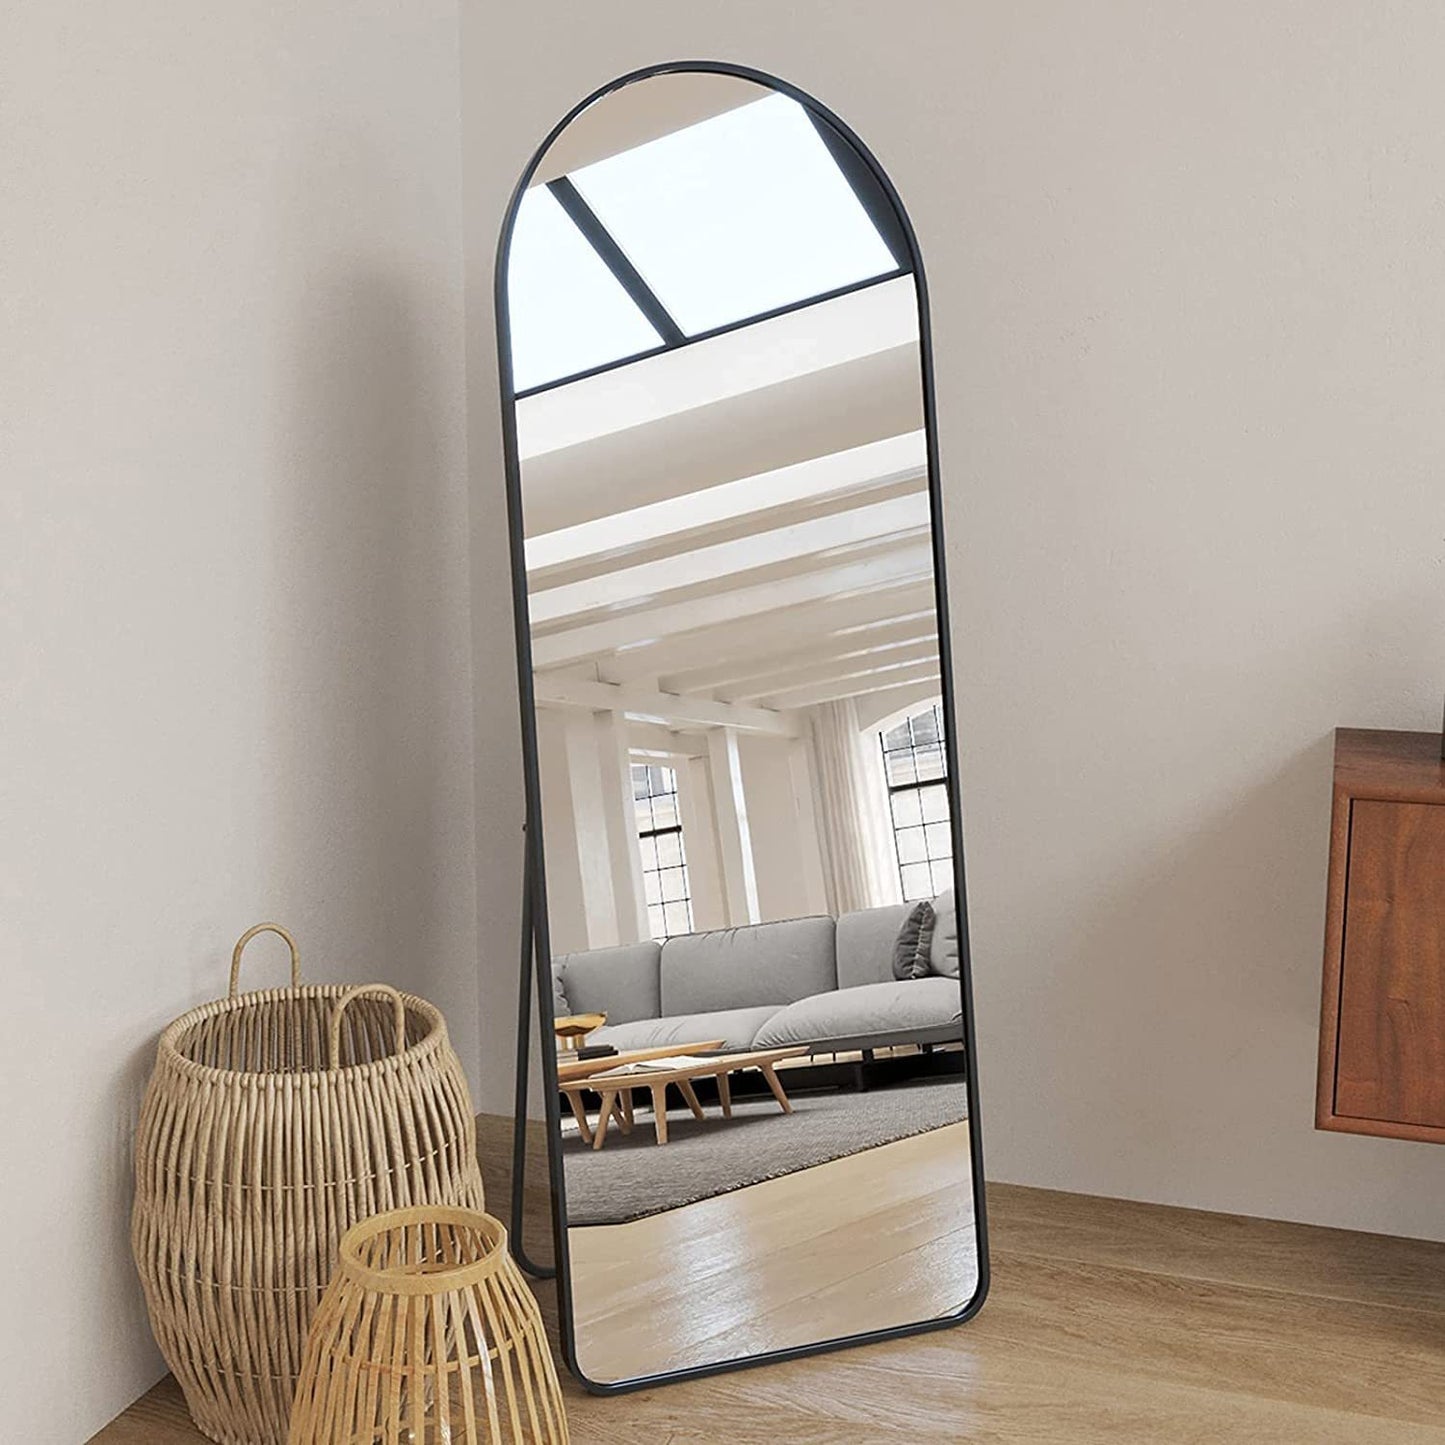 Full Length Wall Mirror - 63” x 20” Arched Free Standing Body Mirror , Black Metal Framed Large Floor Mirror for Bedroom, Modern Stand Up / Leaning Mirror